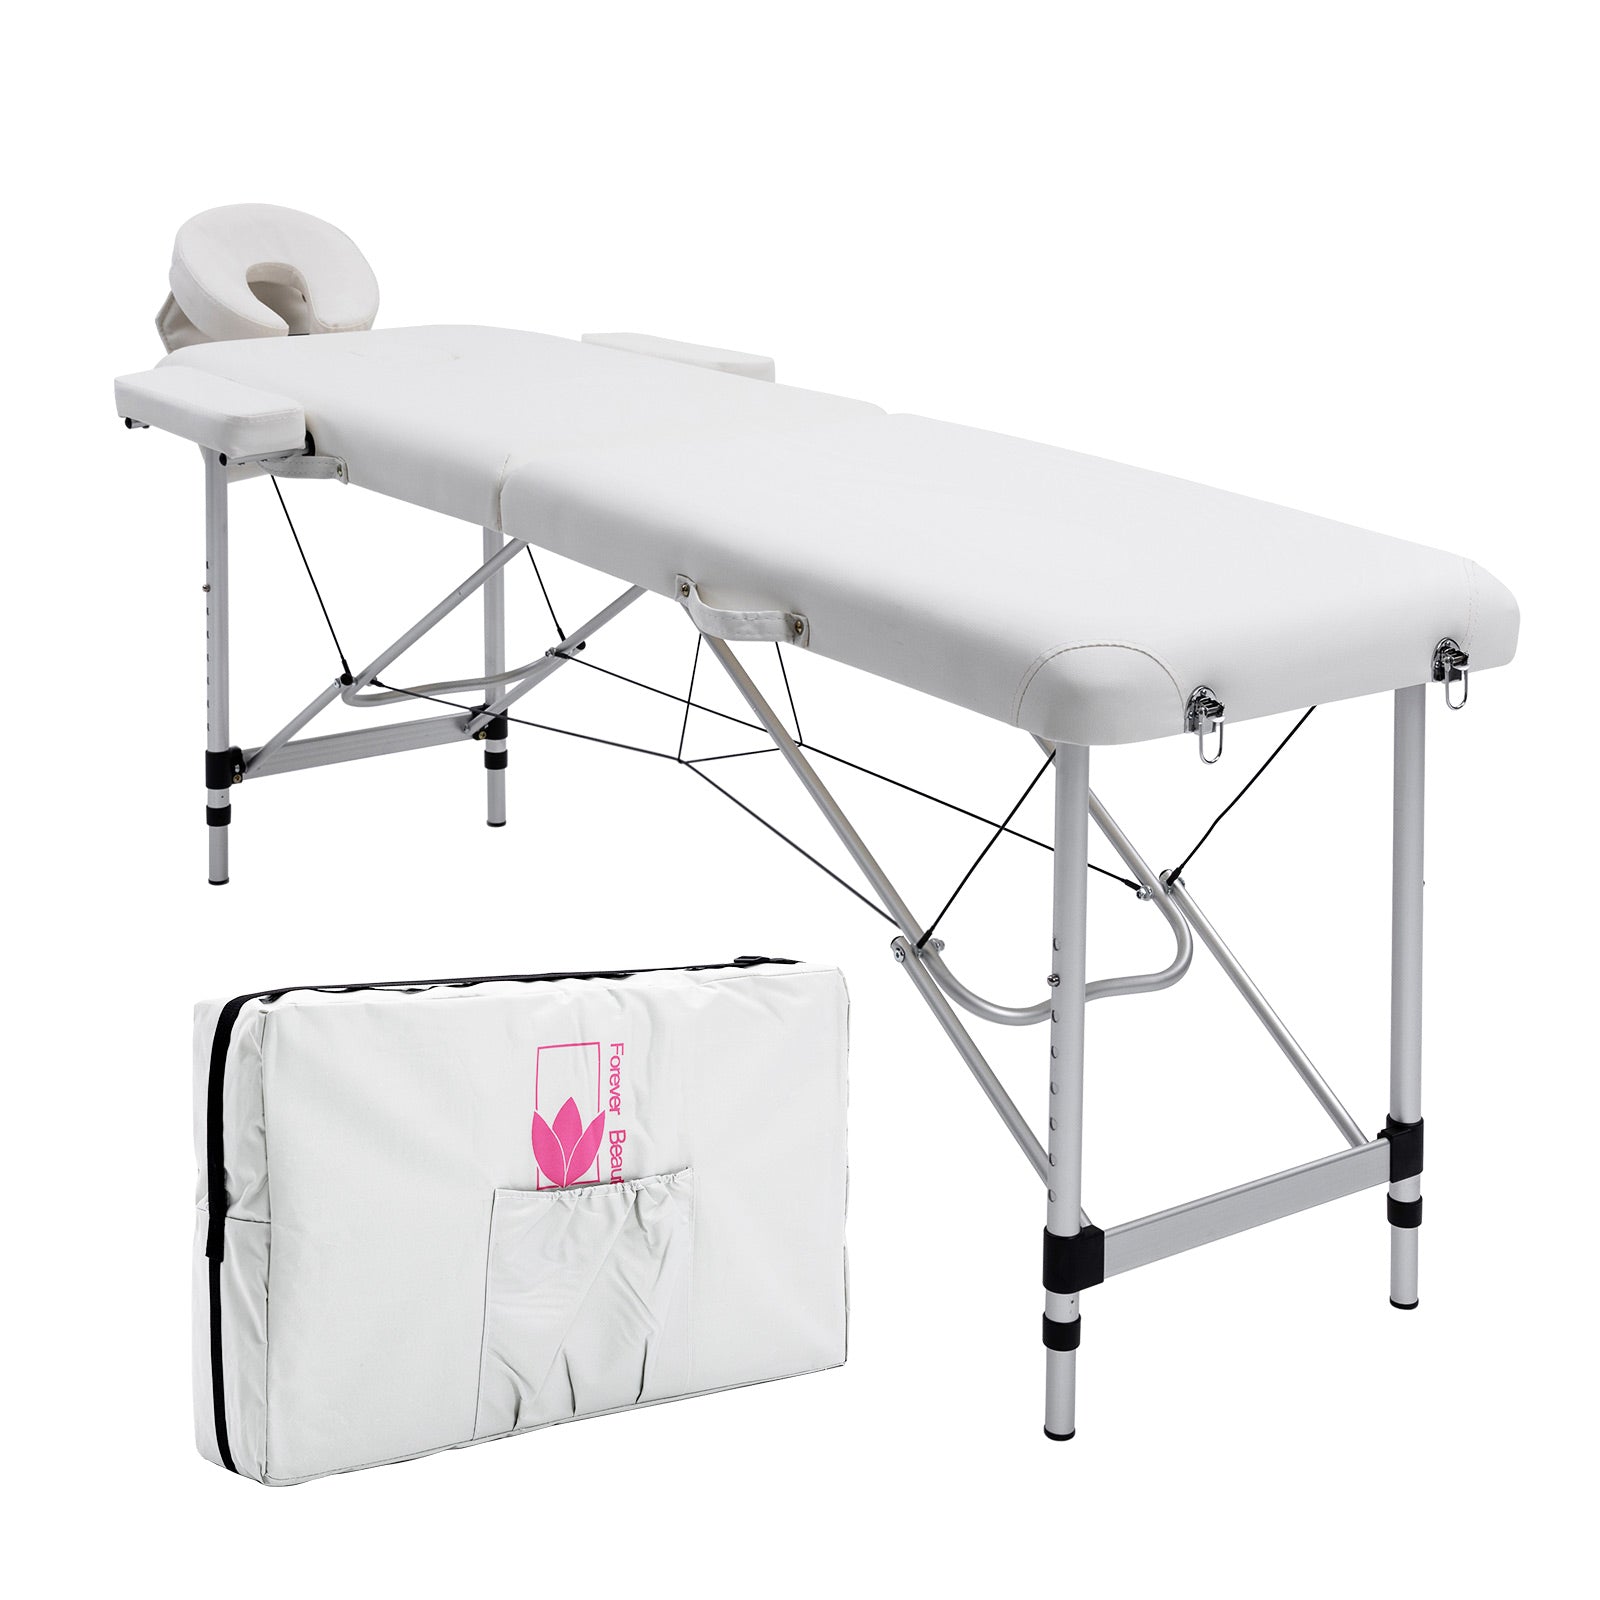 Forever Beauty White Portable Beauty Massage Table Bed Therapy Waxing 2 Fold 55cm Aluminium Deals499